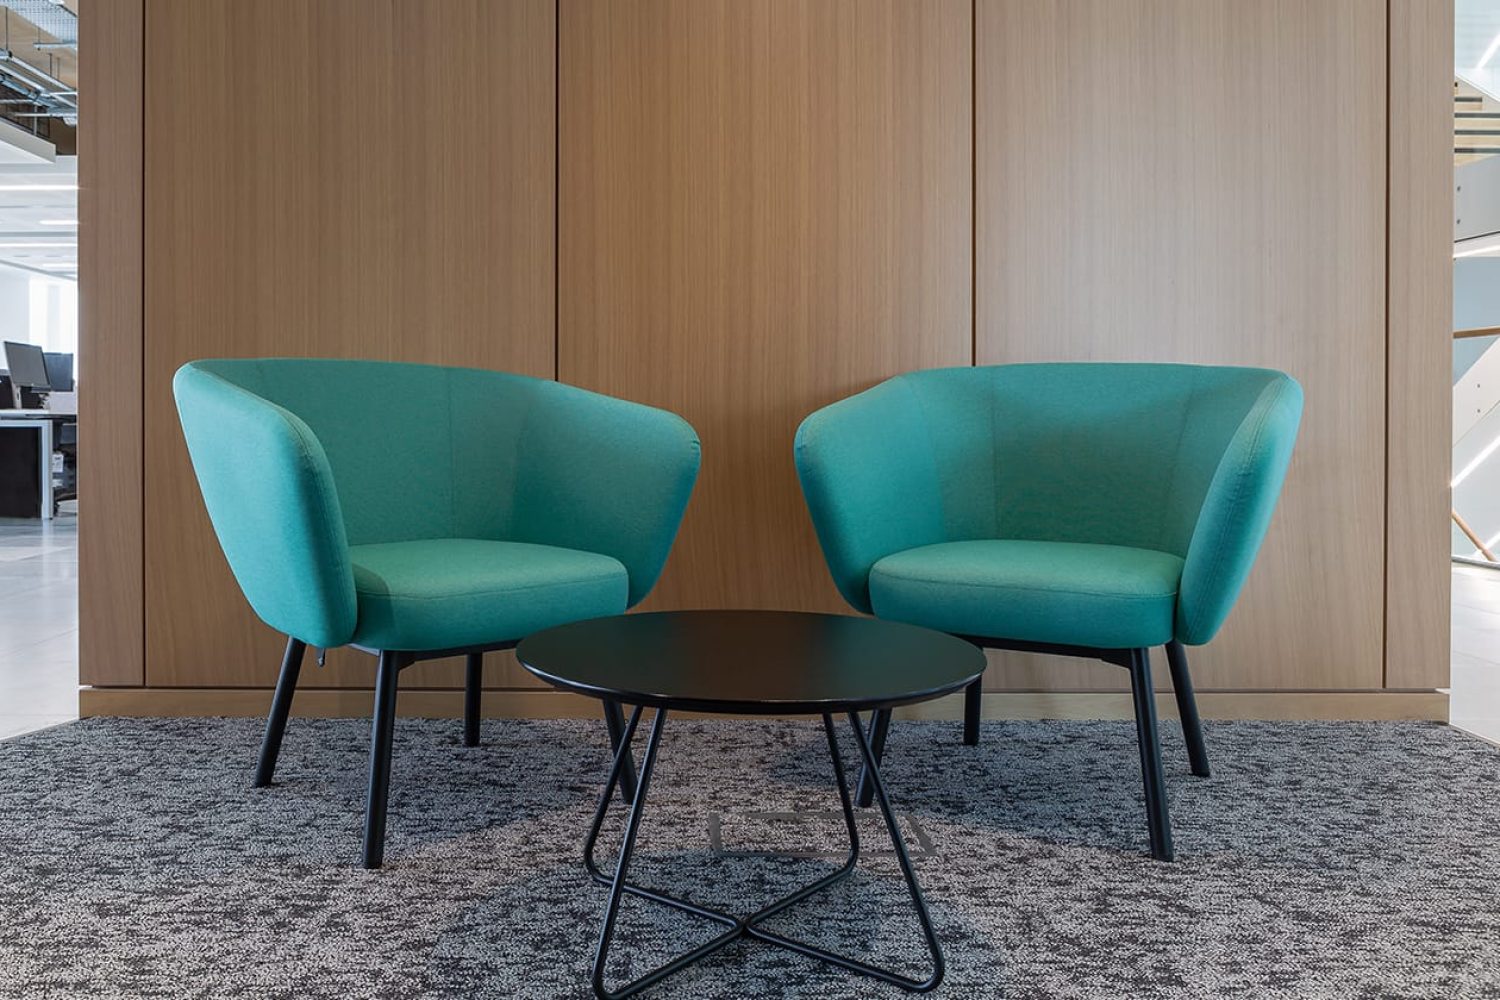 Two lounge chairs for offices in an office with a table in the middle.